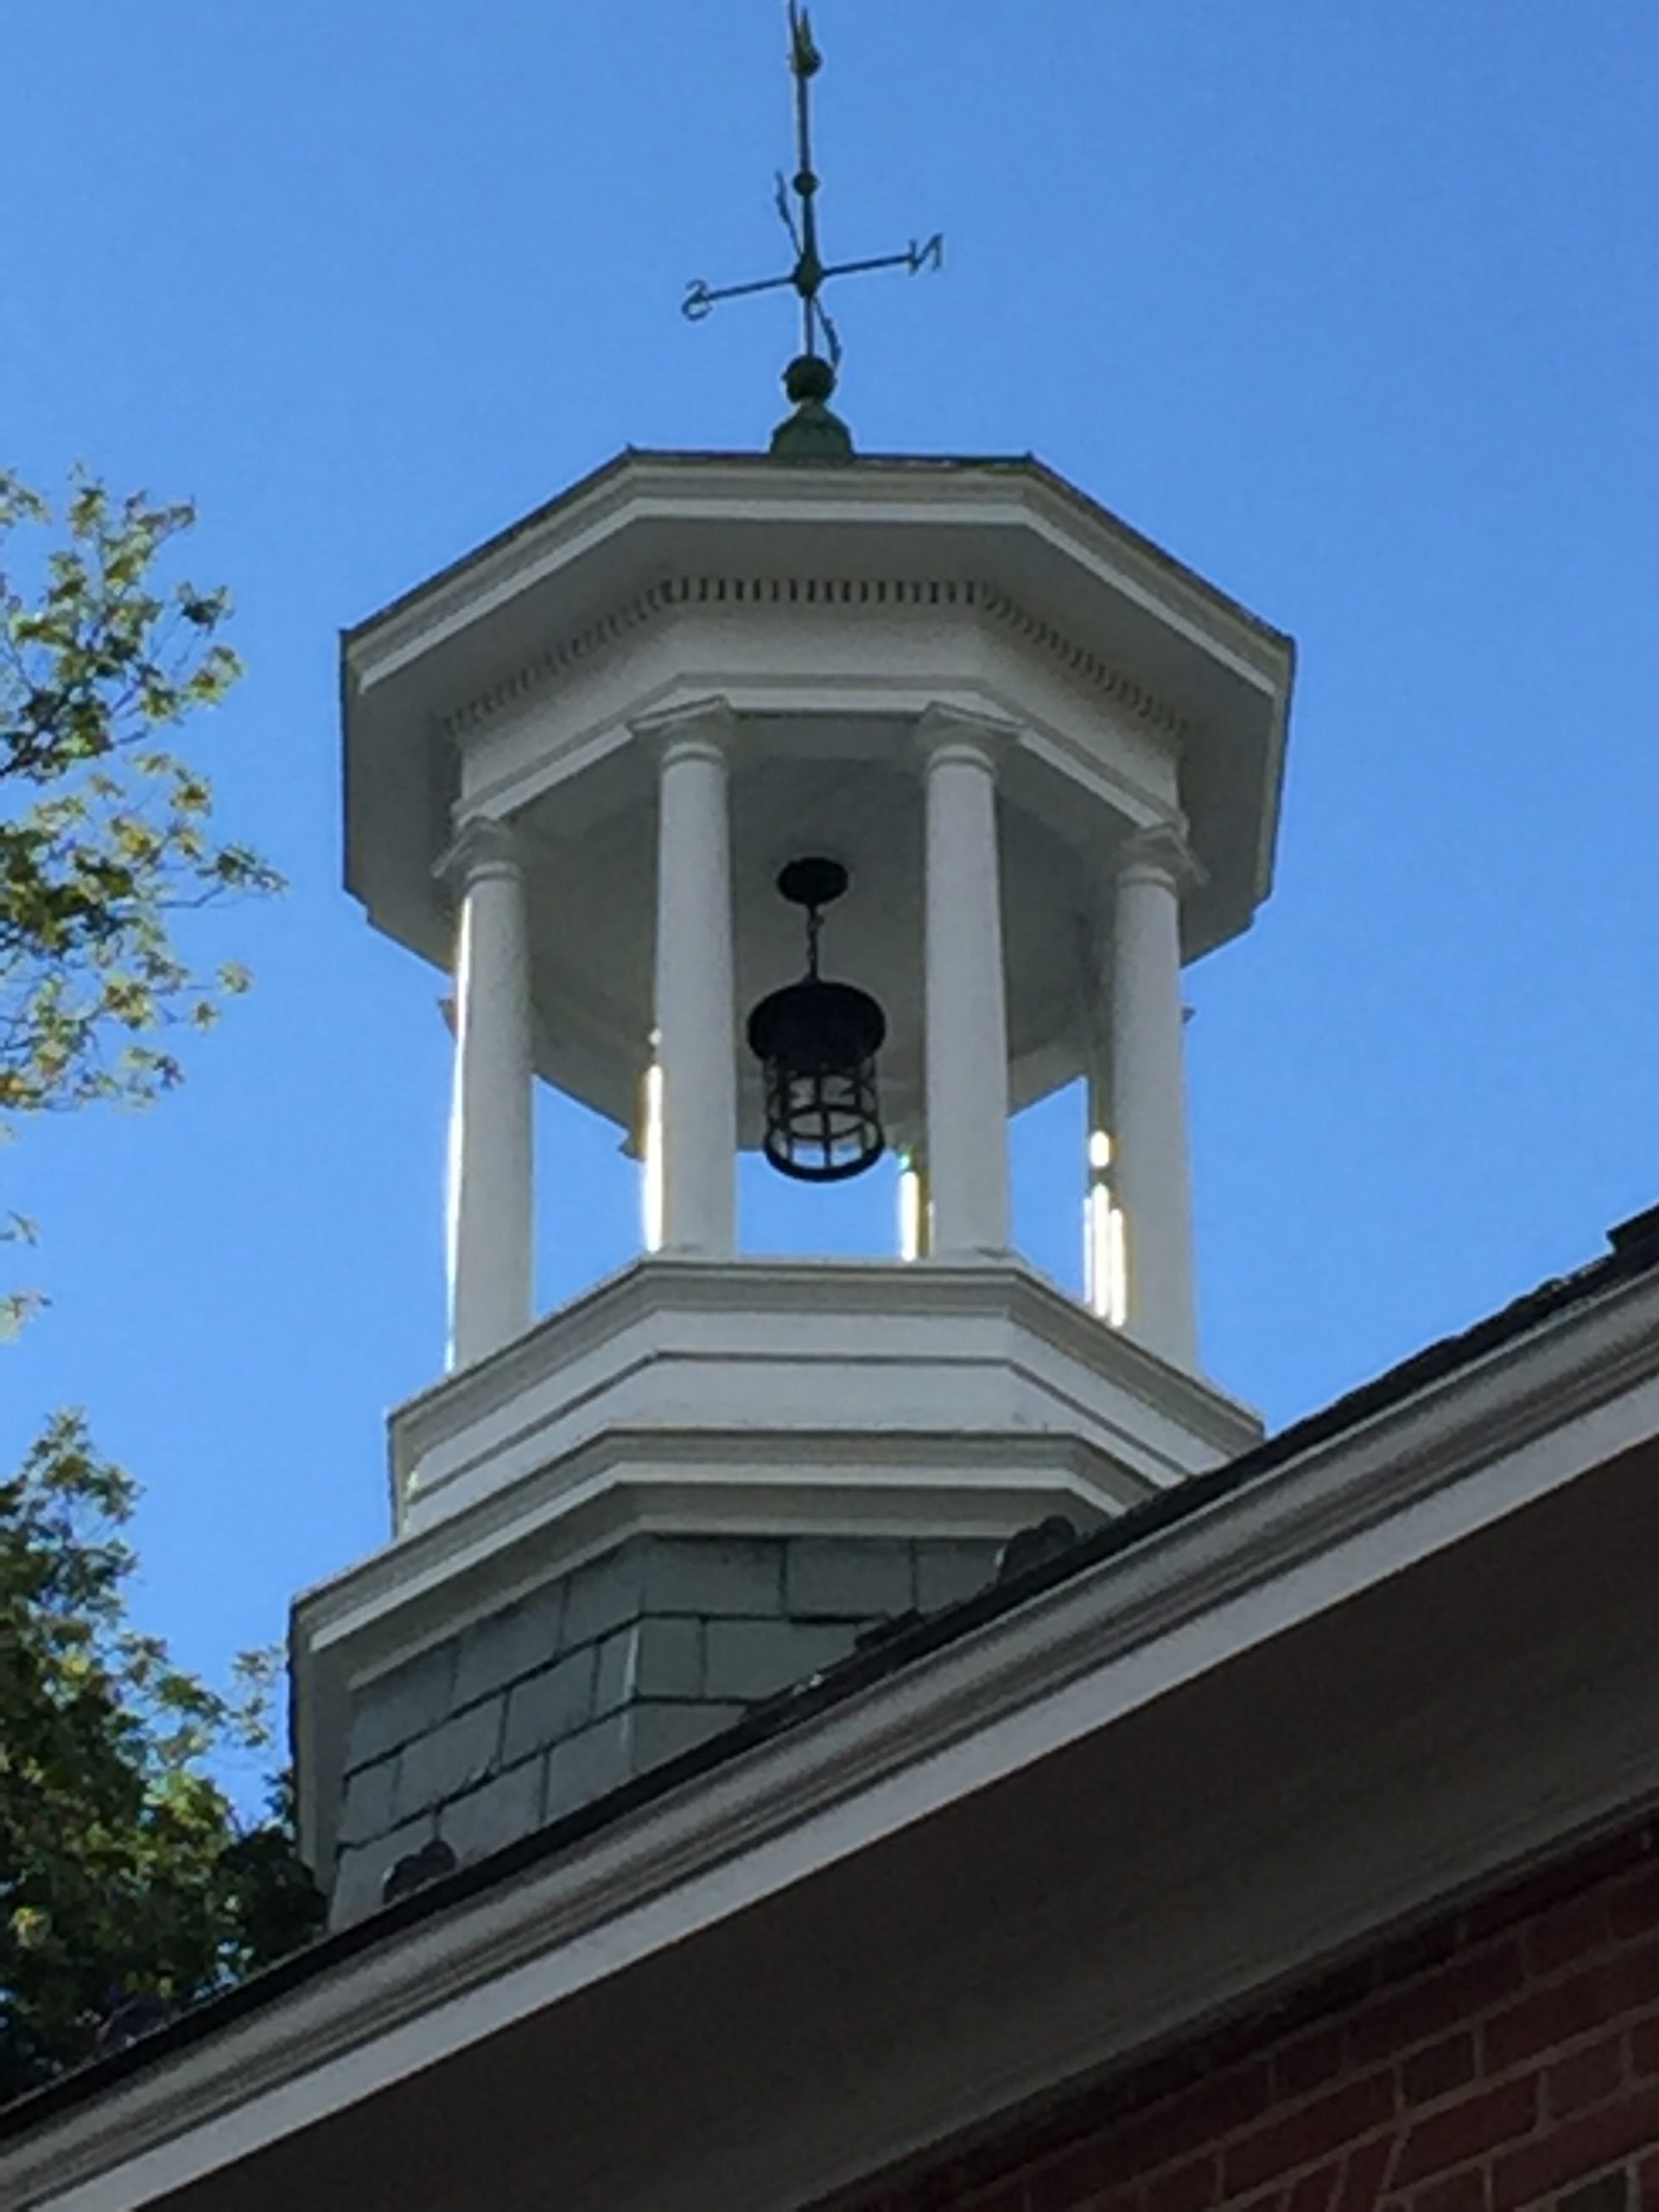 An image of the Library's cupola.